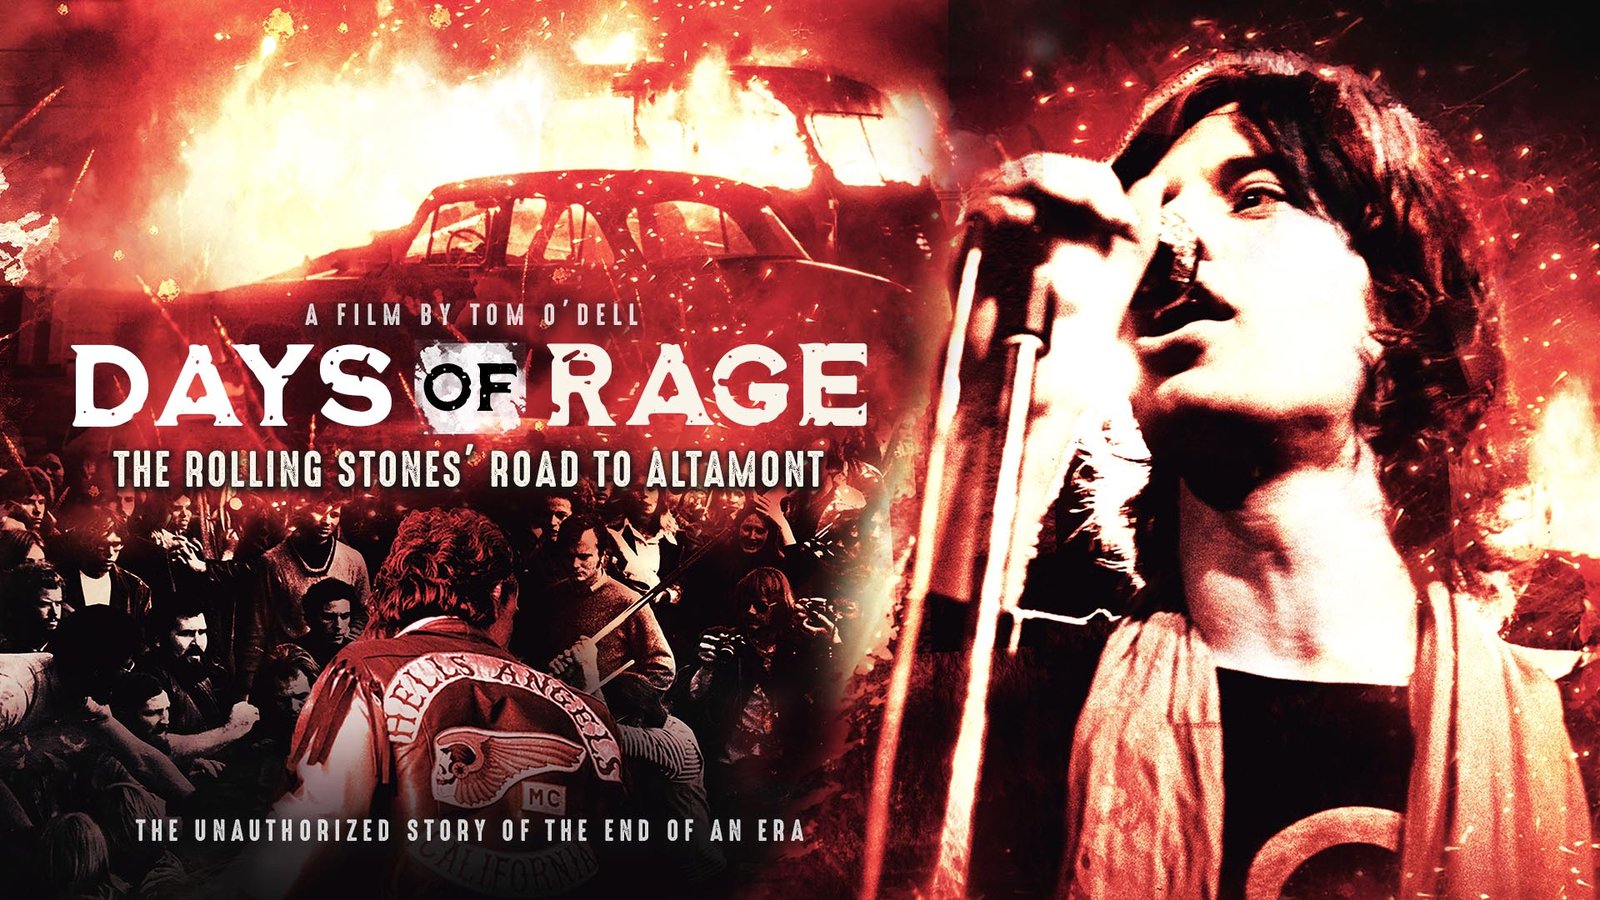 Days of Rage: The Rolling Stones' Road to Altamont